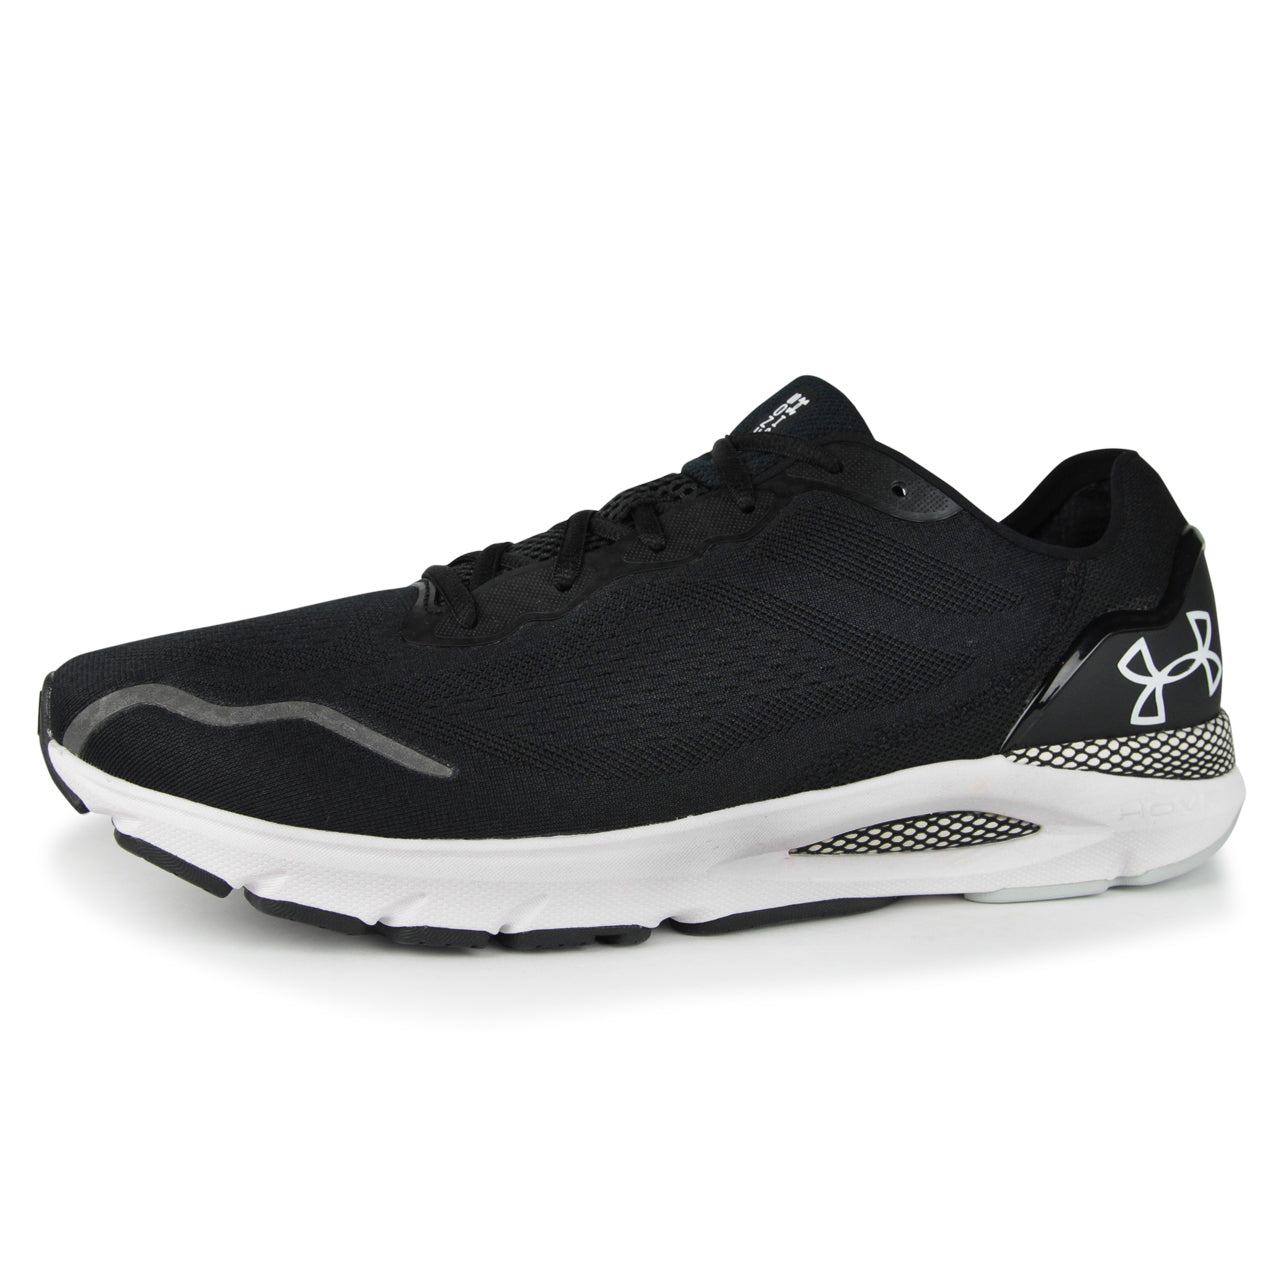 Shop Men's Under Armour Shoes [Sizes 15-20] // ODDBALL